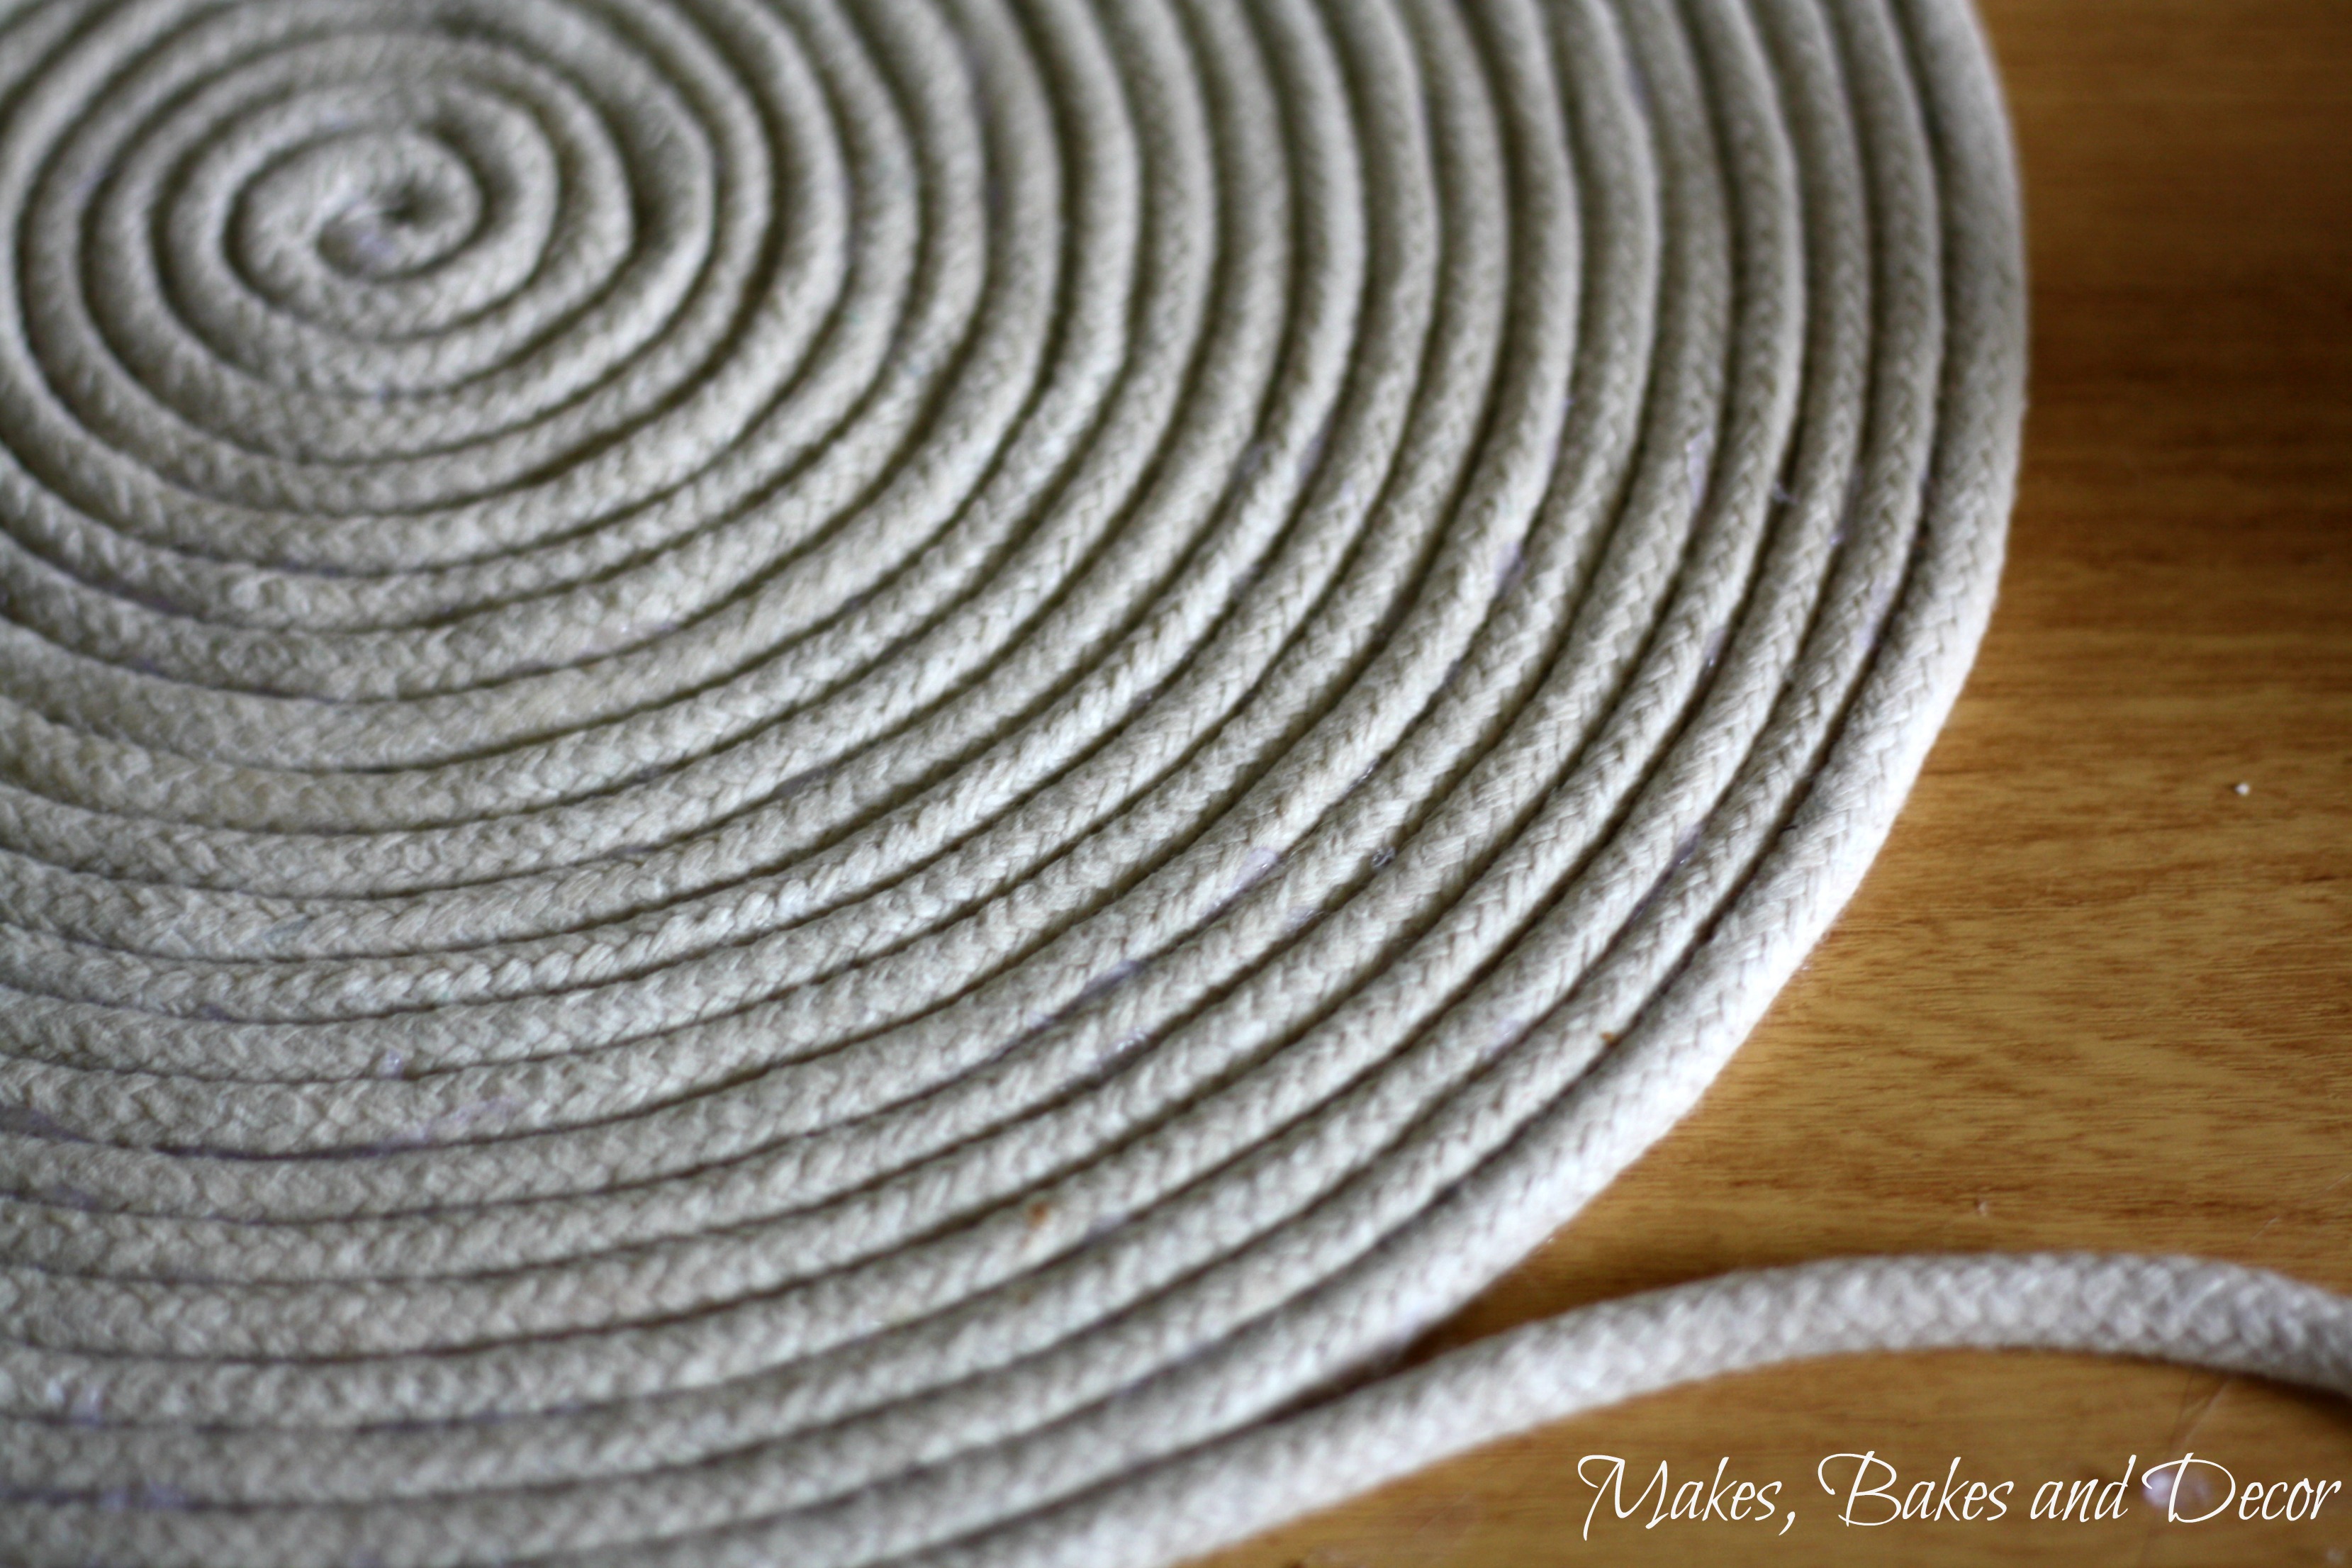 Coiled Rope Placemats - Makes, Bakes and Decor